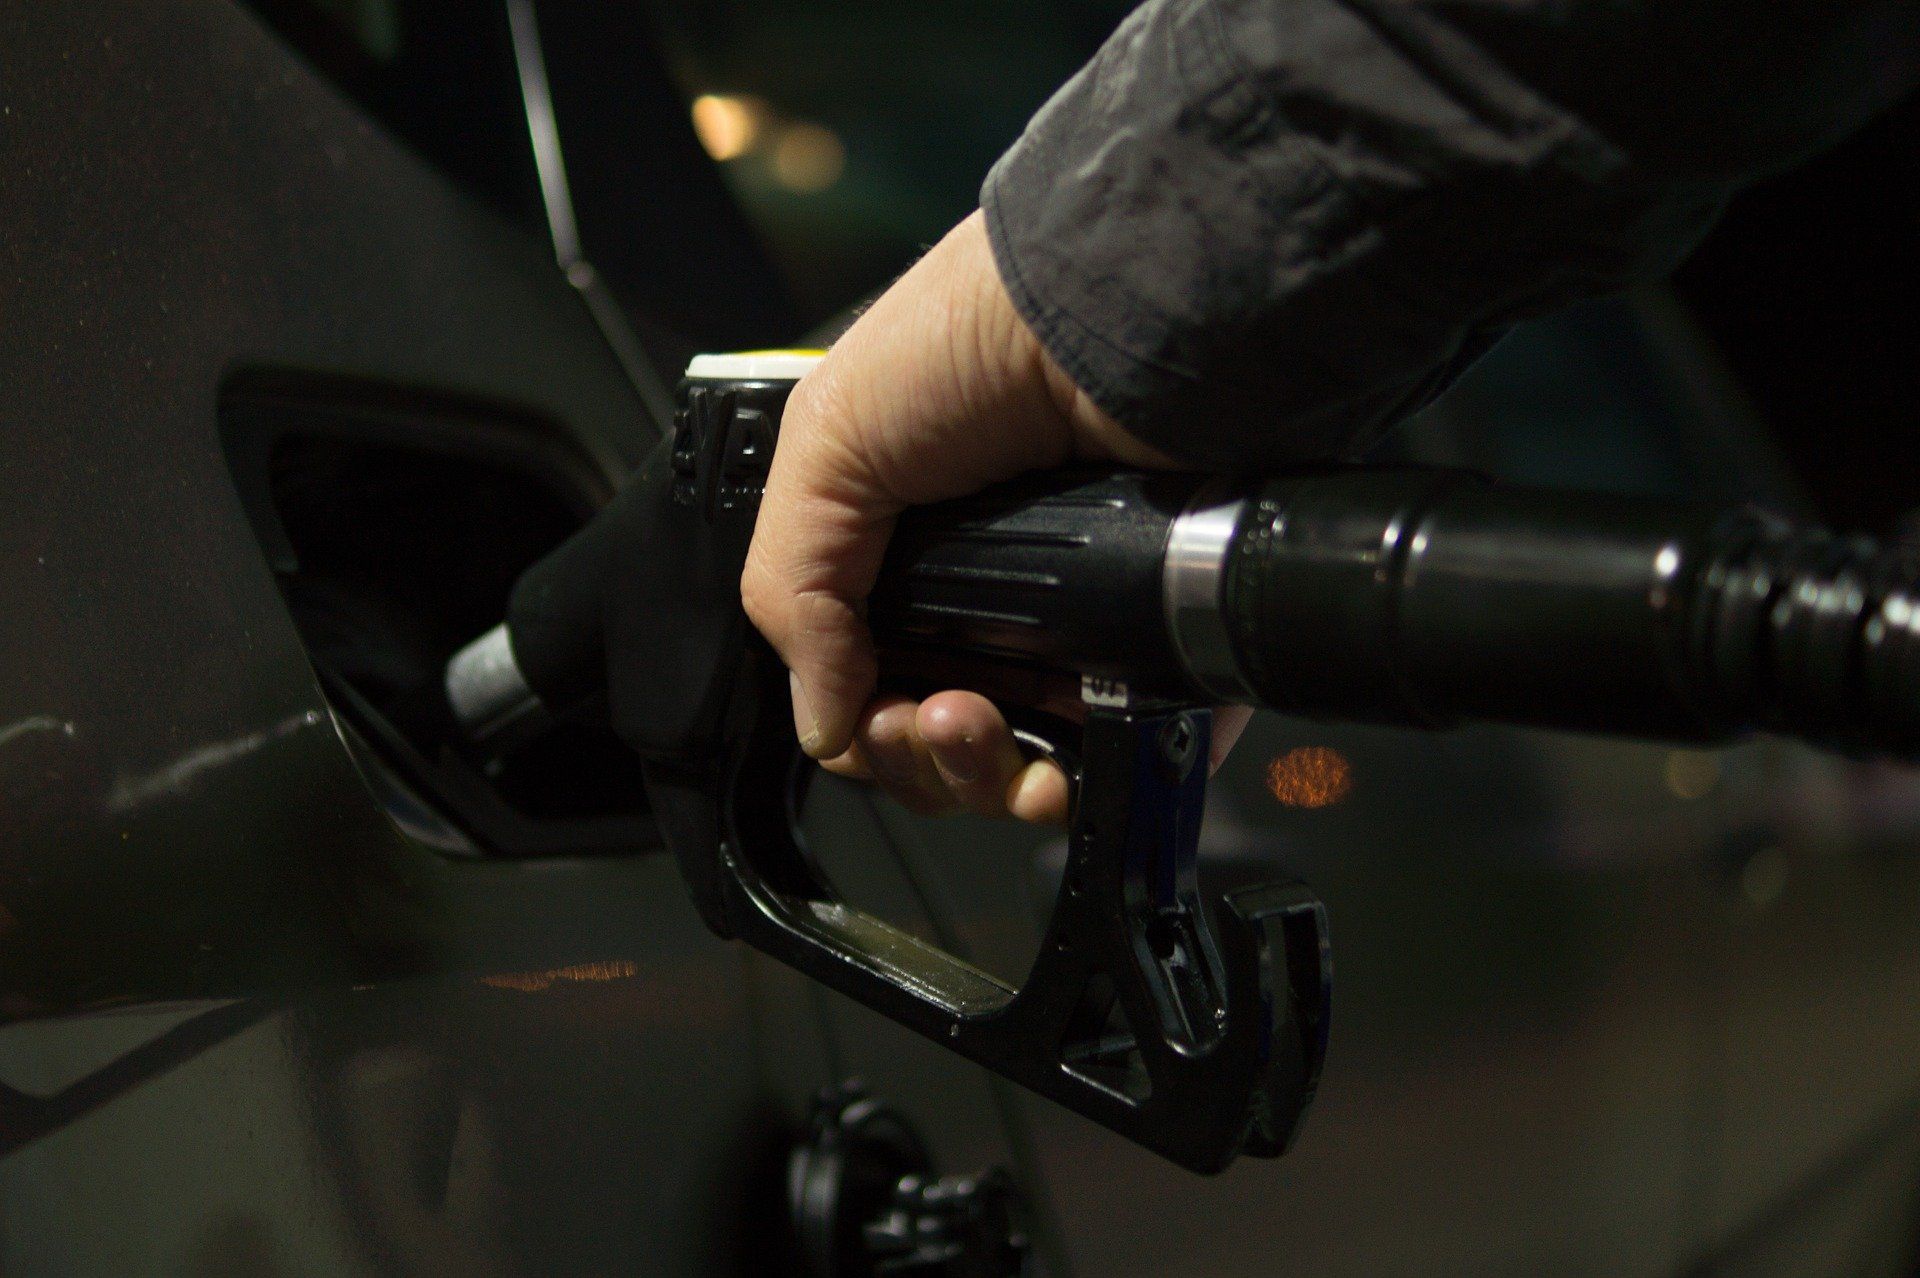 Fuel prices: Petrol priced at Rs 95.41, diesel Rs 86.67 in Delhi on March 21, 2022